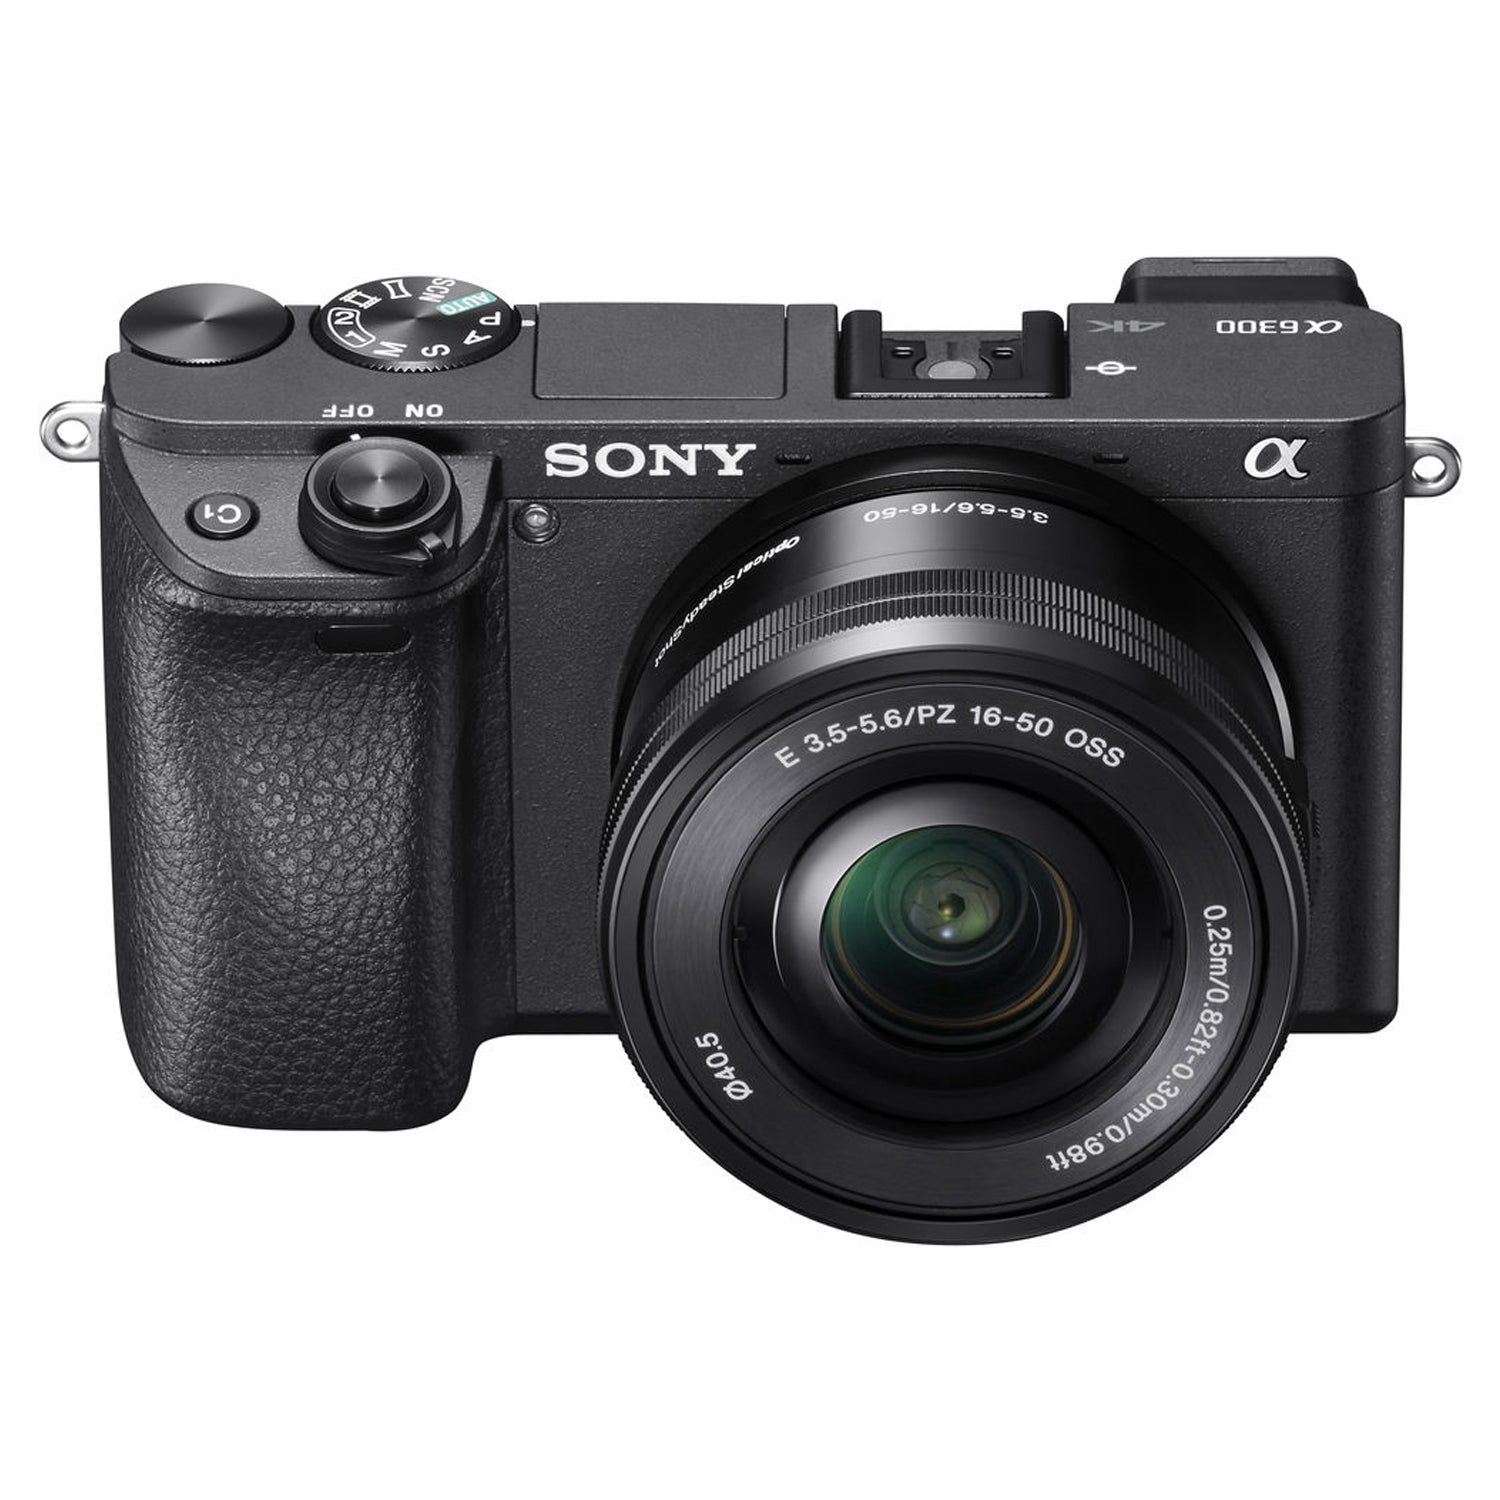 Sony Alpha a6300 Mirrorless Camera with 16-50mm Lens Black ILCE6300L/B With Soft Bag, 64GB Memory Card, Card Reader , Plus Essential Accessories